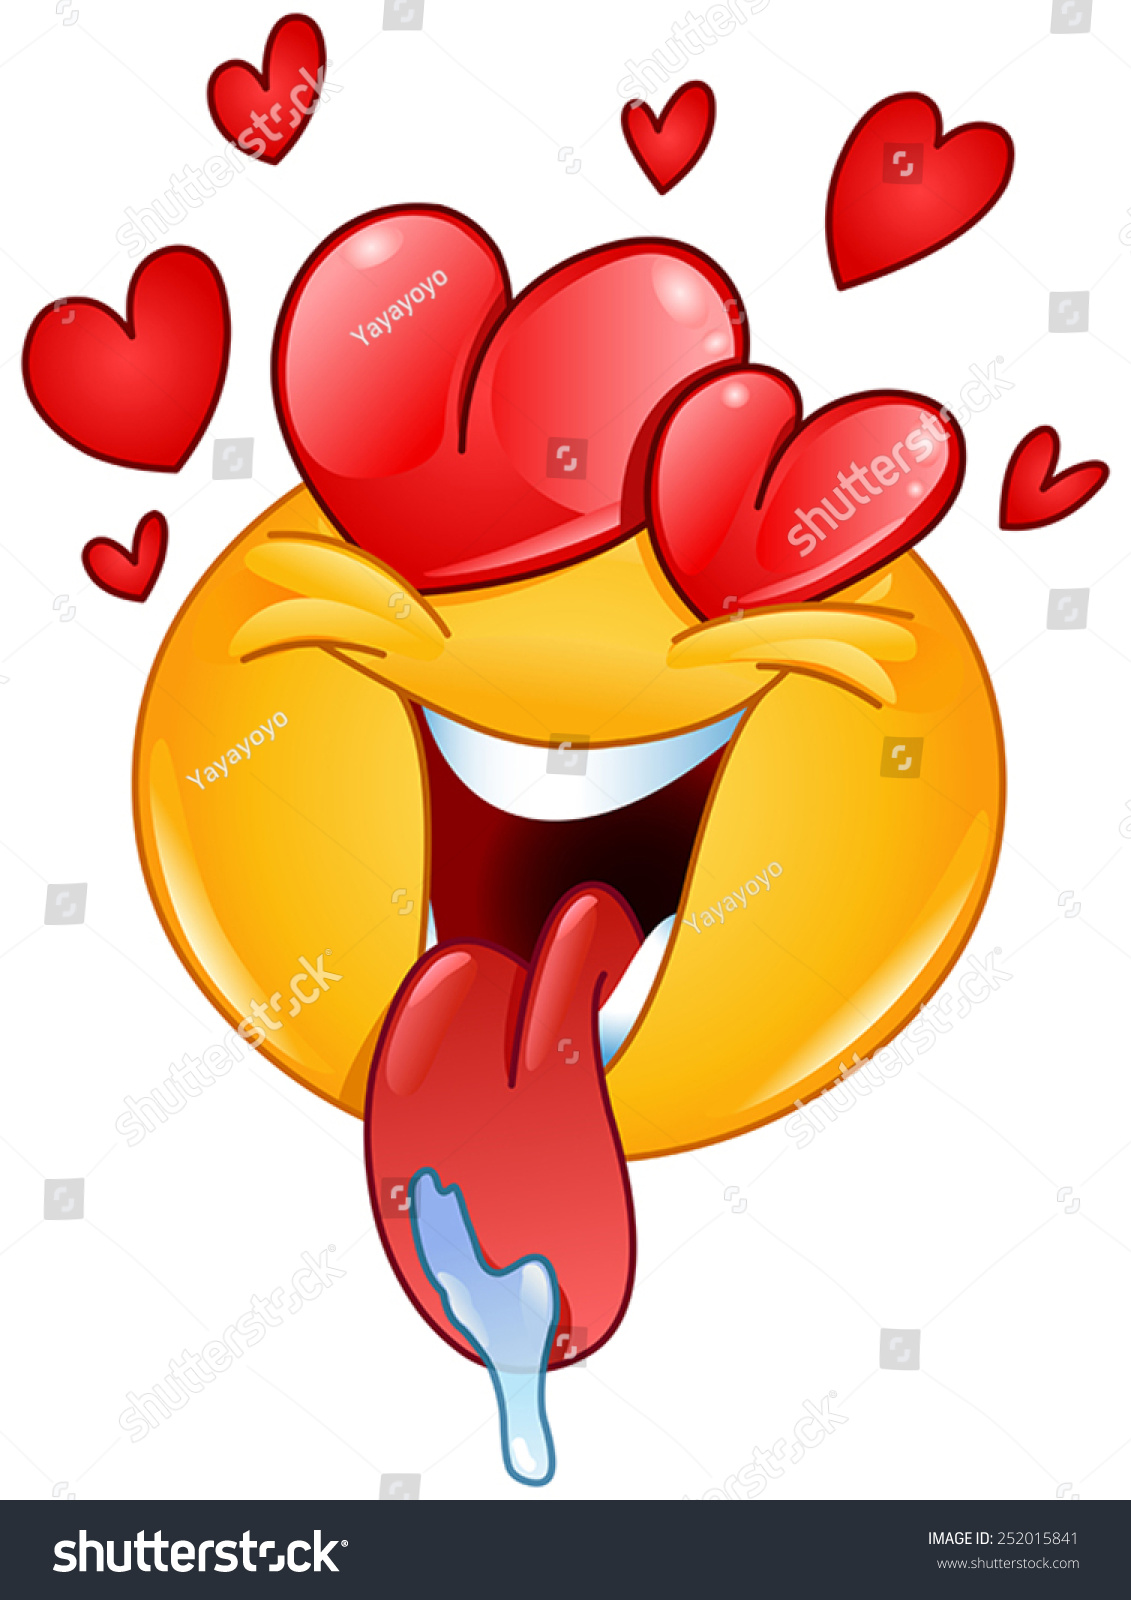 stock-vector-in-love-emoticon-with-hearts-and-tongue-out-drooling-252015841.jpg